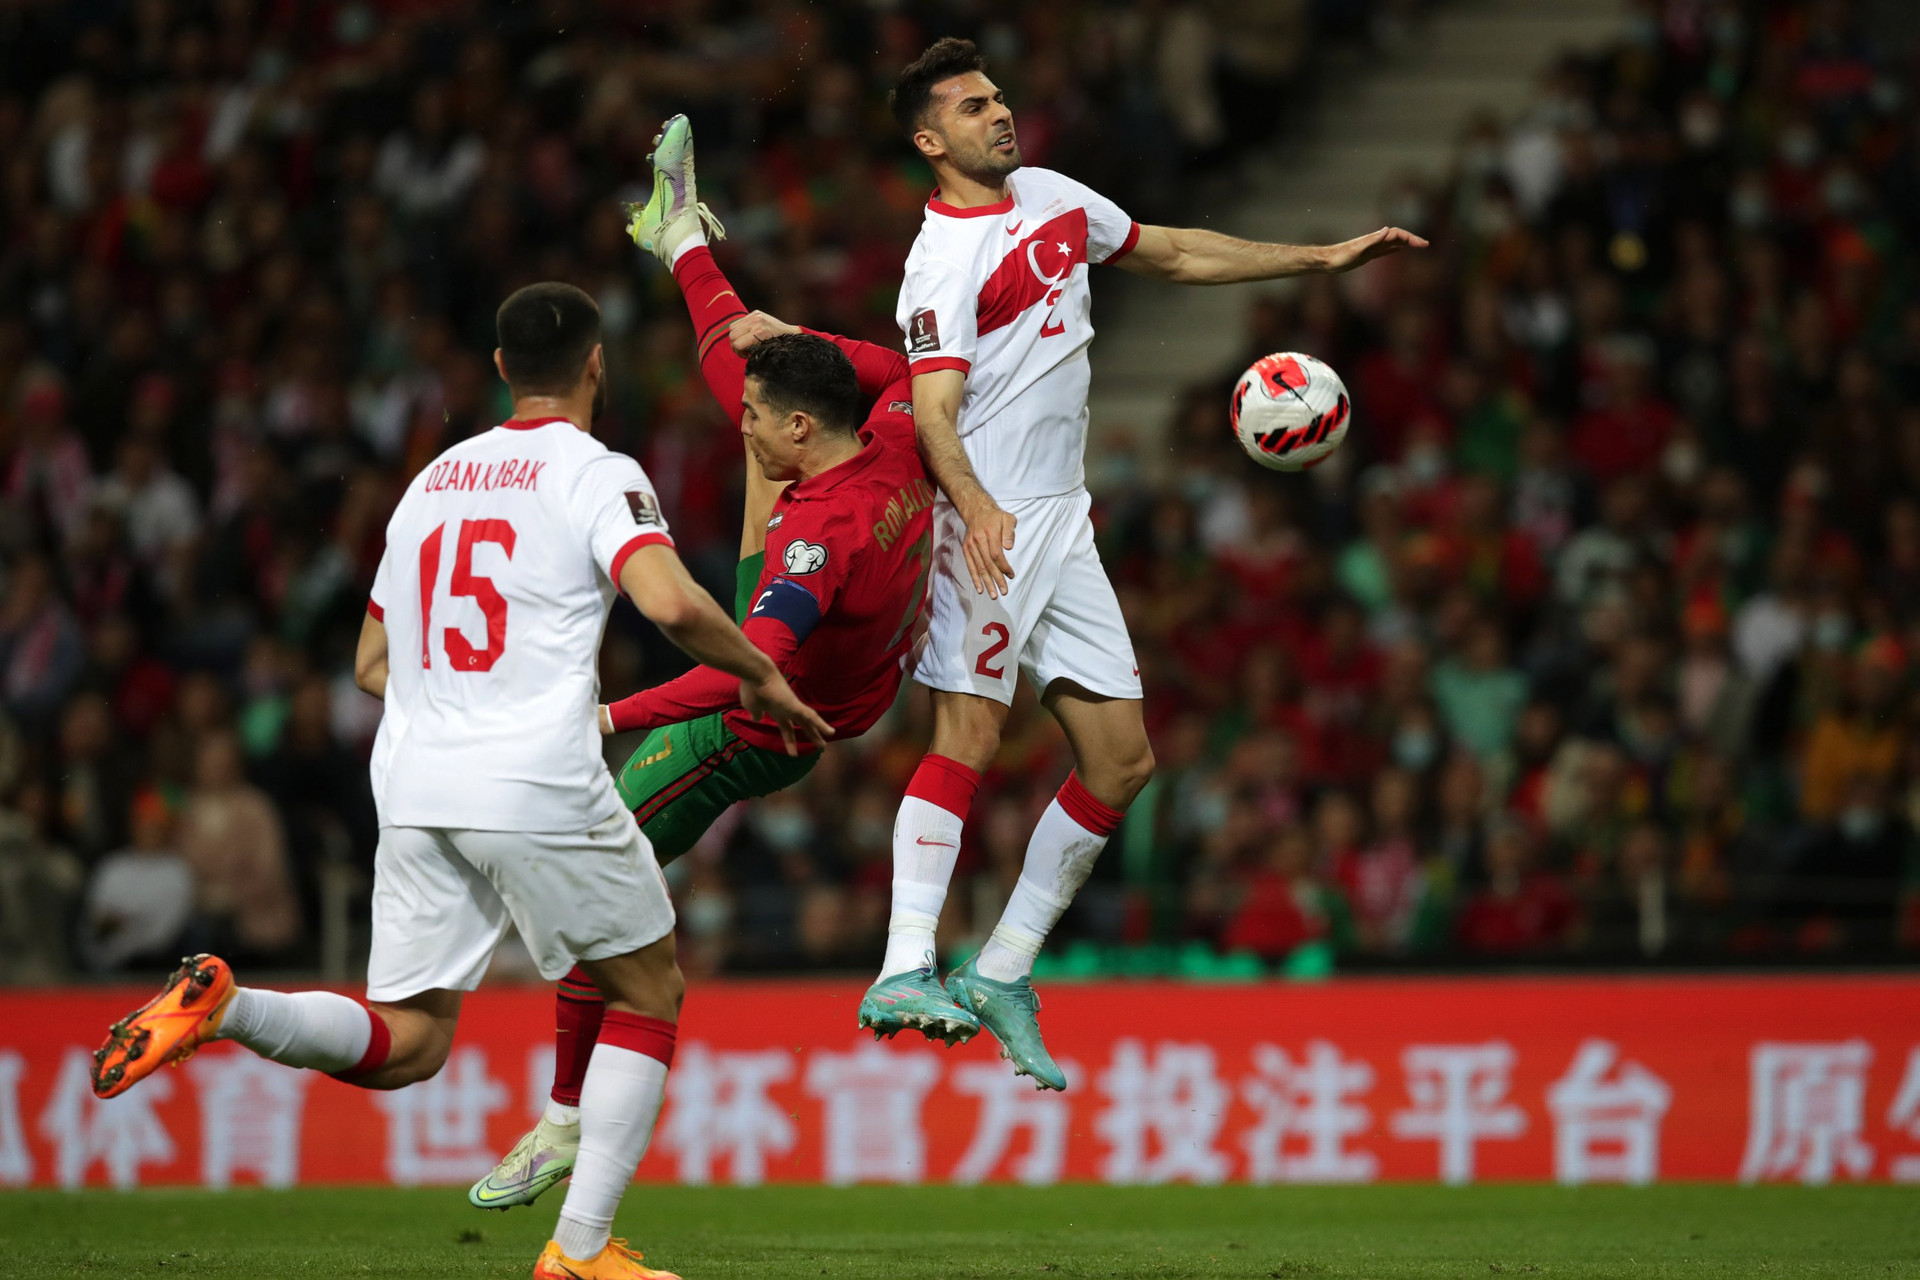 Penalty miss costs Turkey as Portugal advances in World Cup qualifiers | Daily Sabah